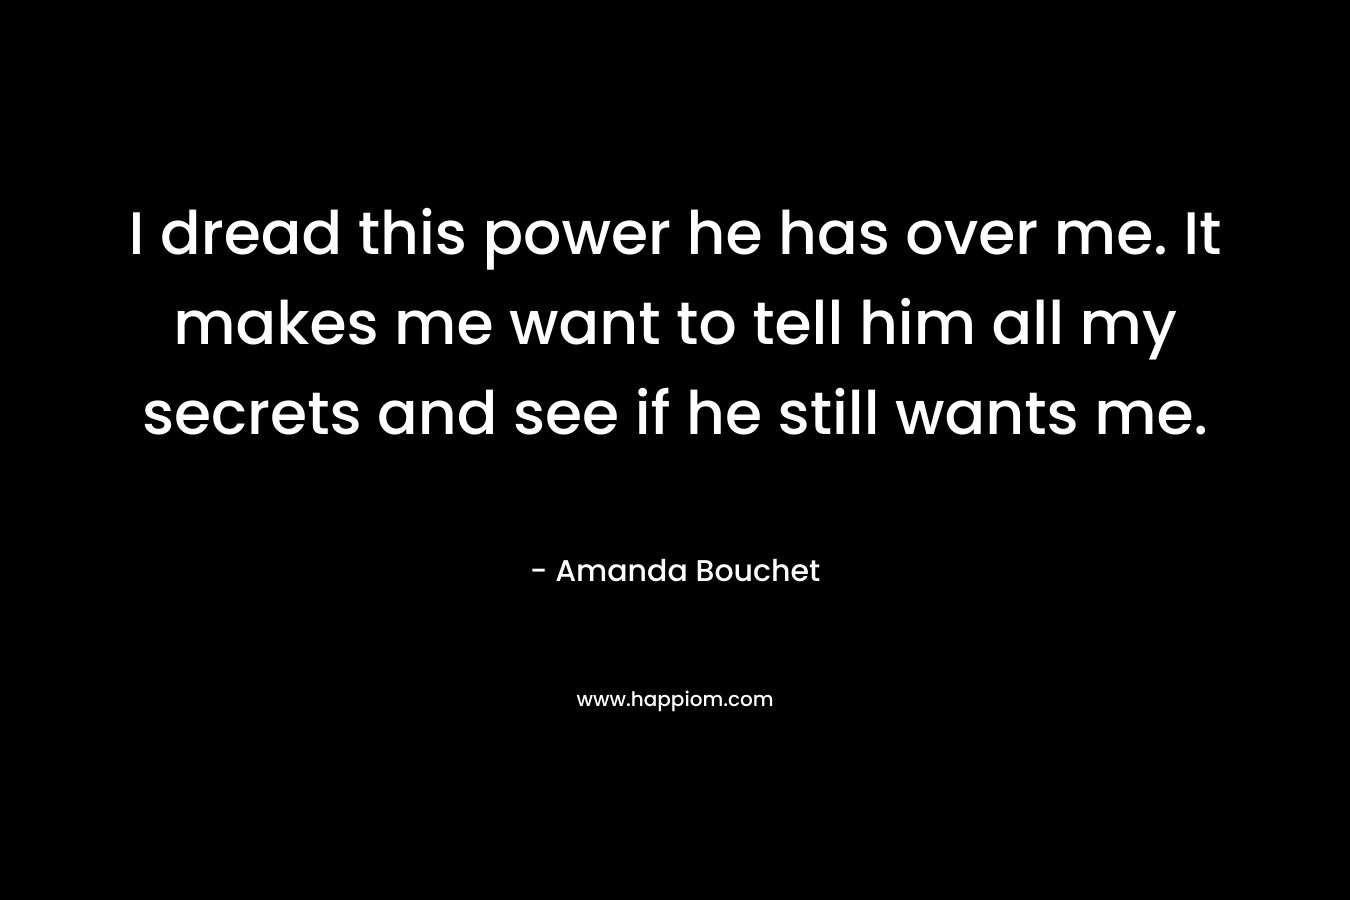 I dread this power he has over me. It makes me want to tell him all my secrets and see if he still wants me. – Amanda Bouchet